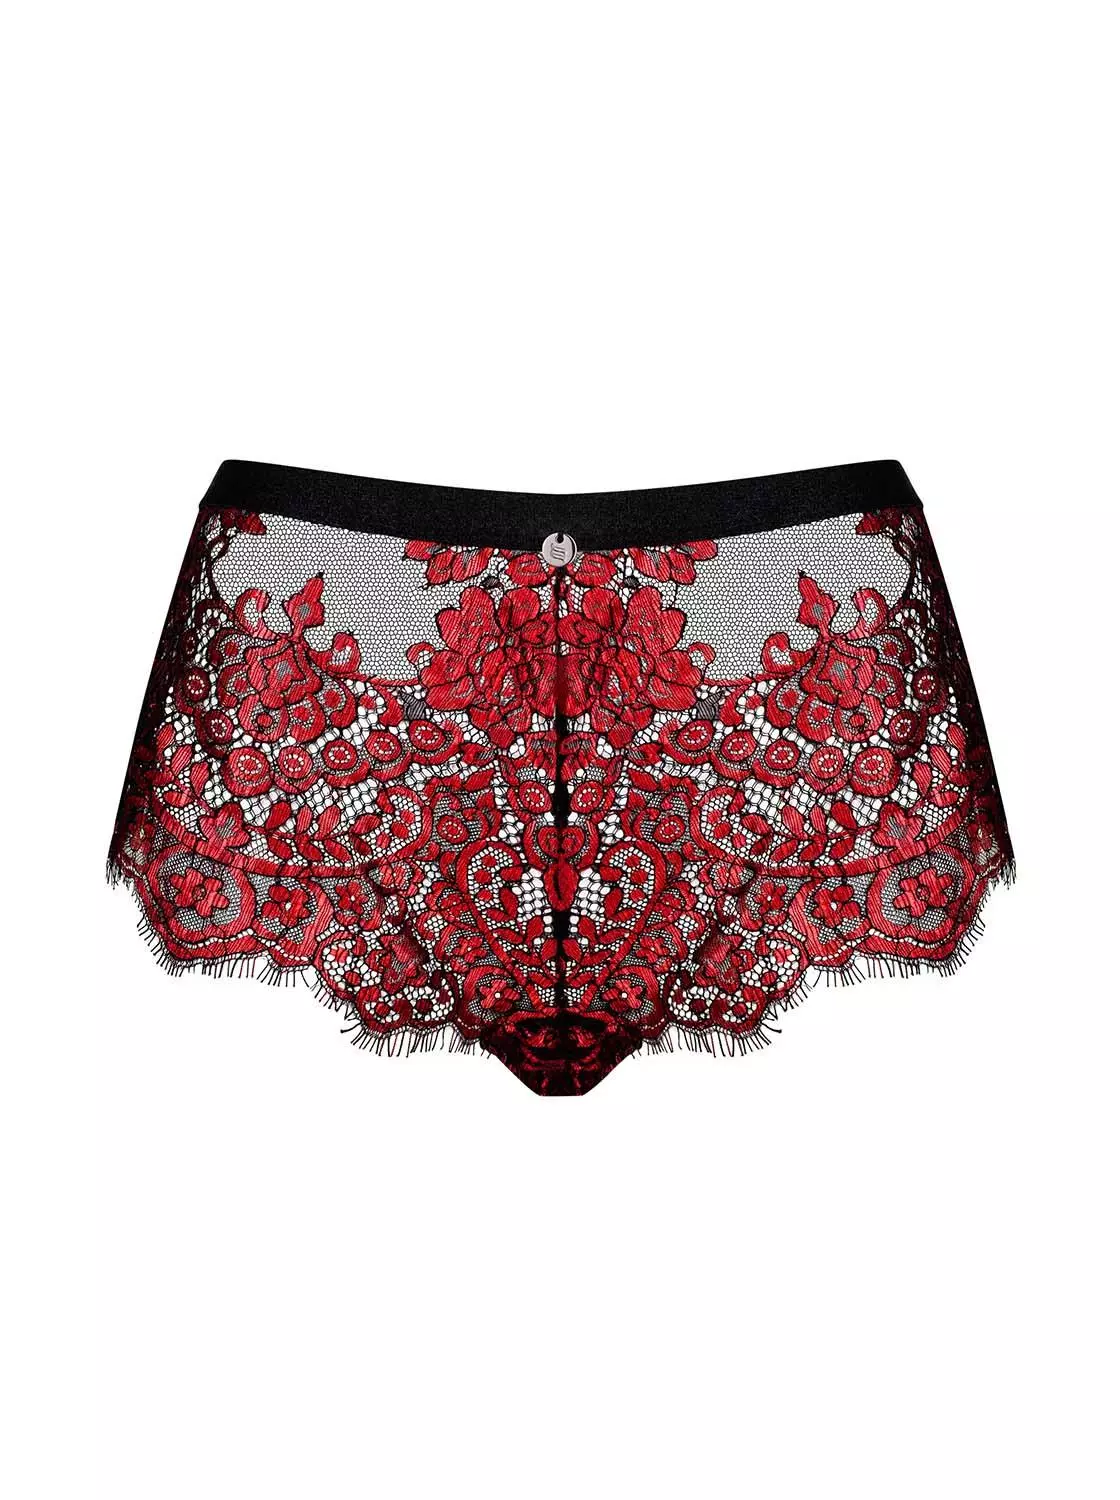 REDESSIA RED PANTIES